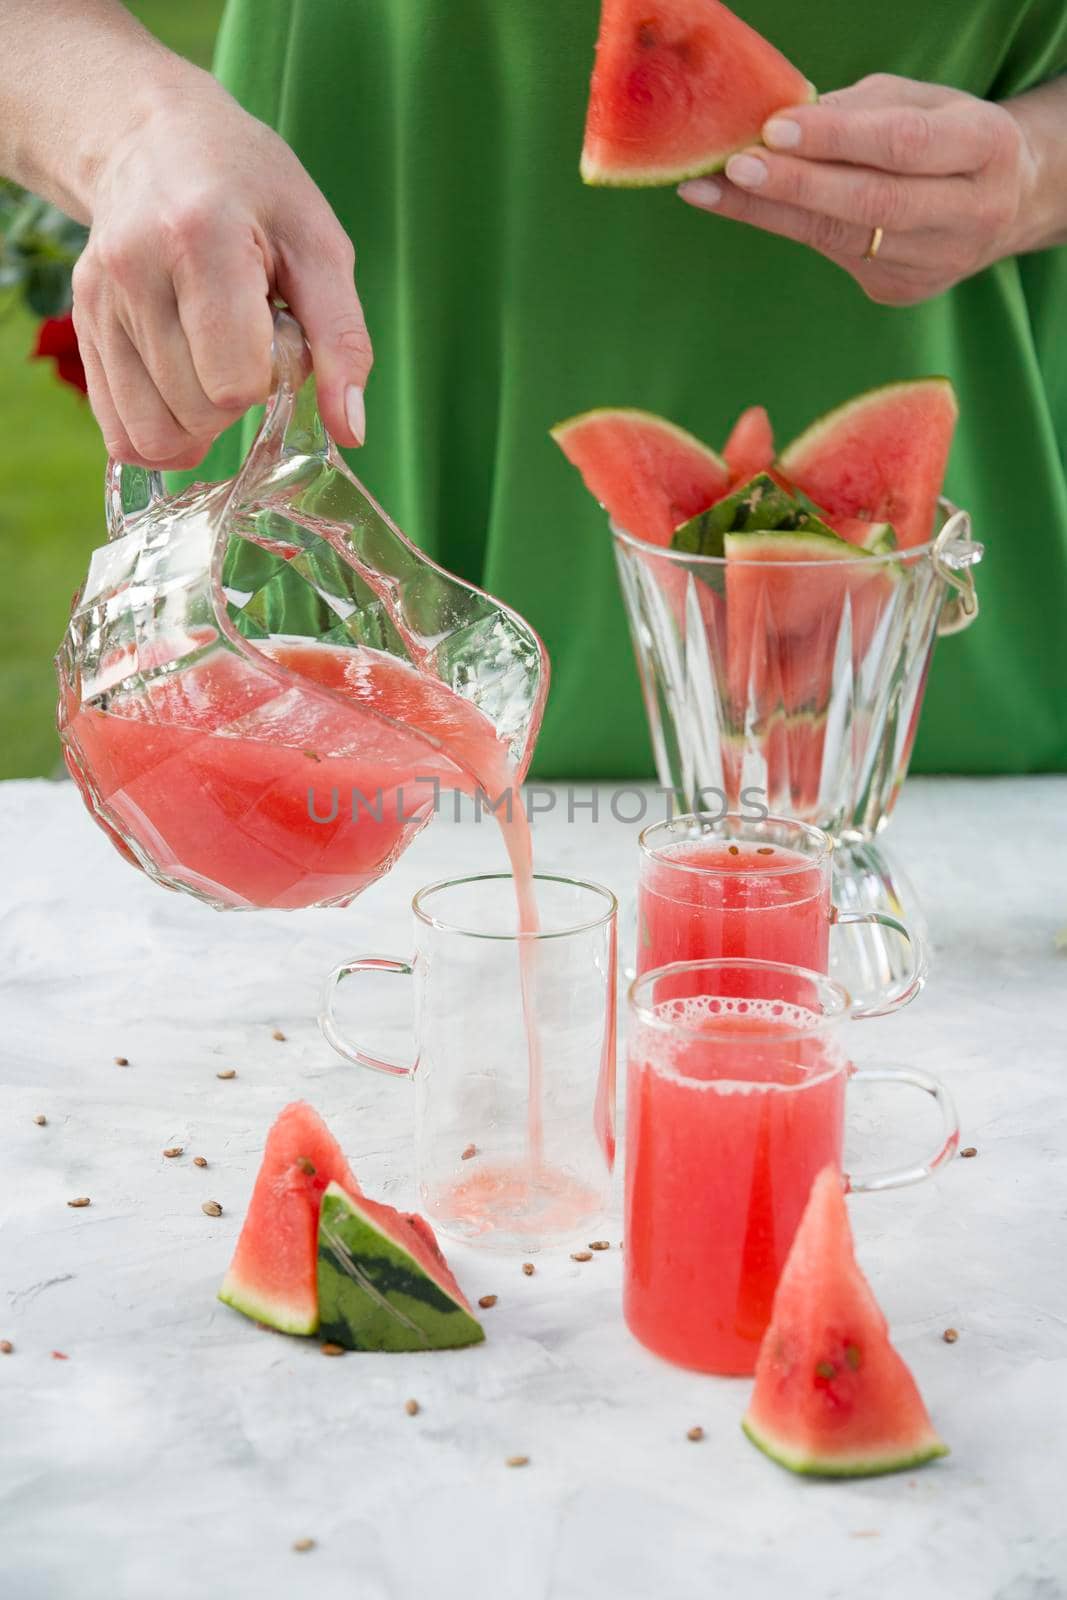 a woman in a green dress pours a red refreshing drink from the watermelon by KaterinaDalemans